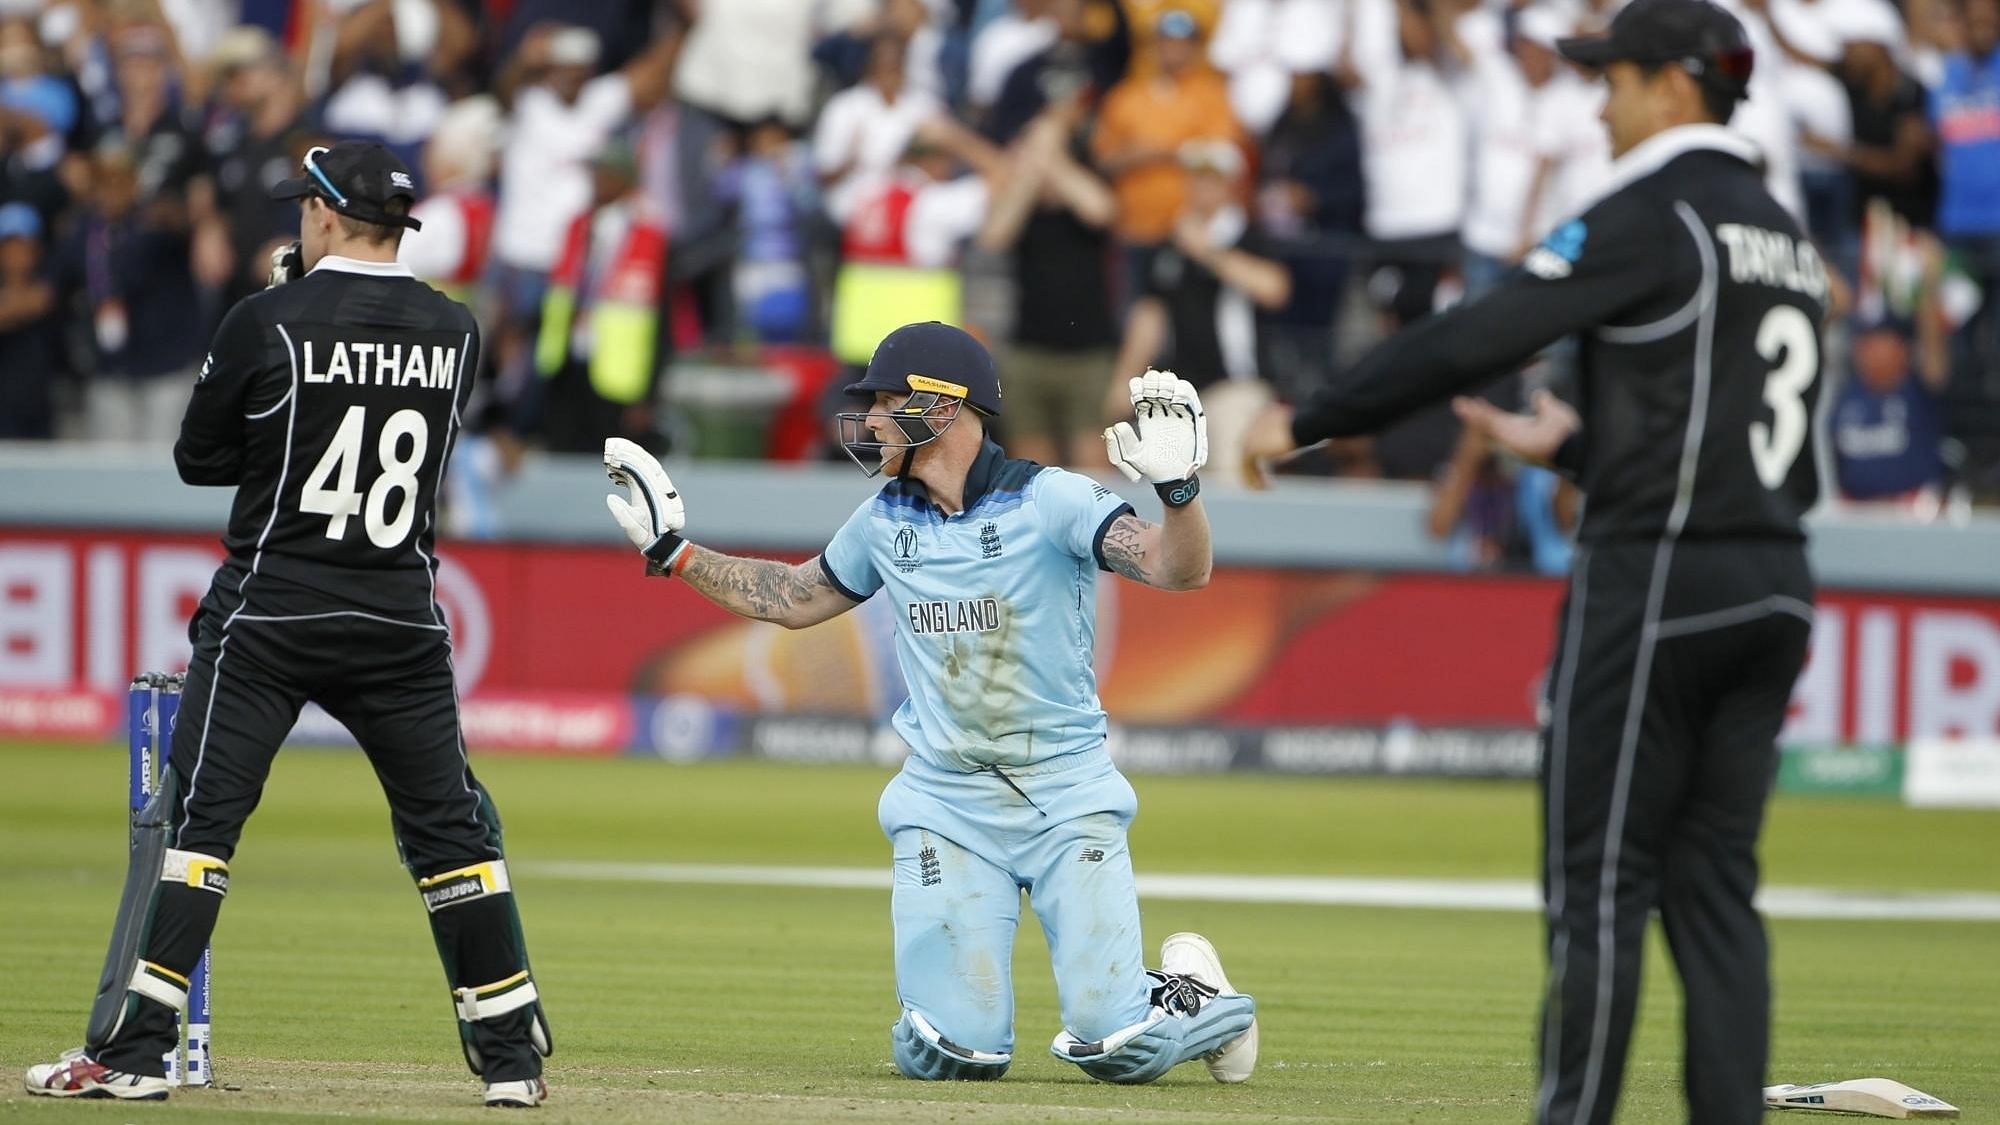 England’s Ben Stokes reacts after the ball hits his bat and goes onto cross the boundary line during the final of the 2019 World Cup.